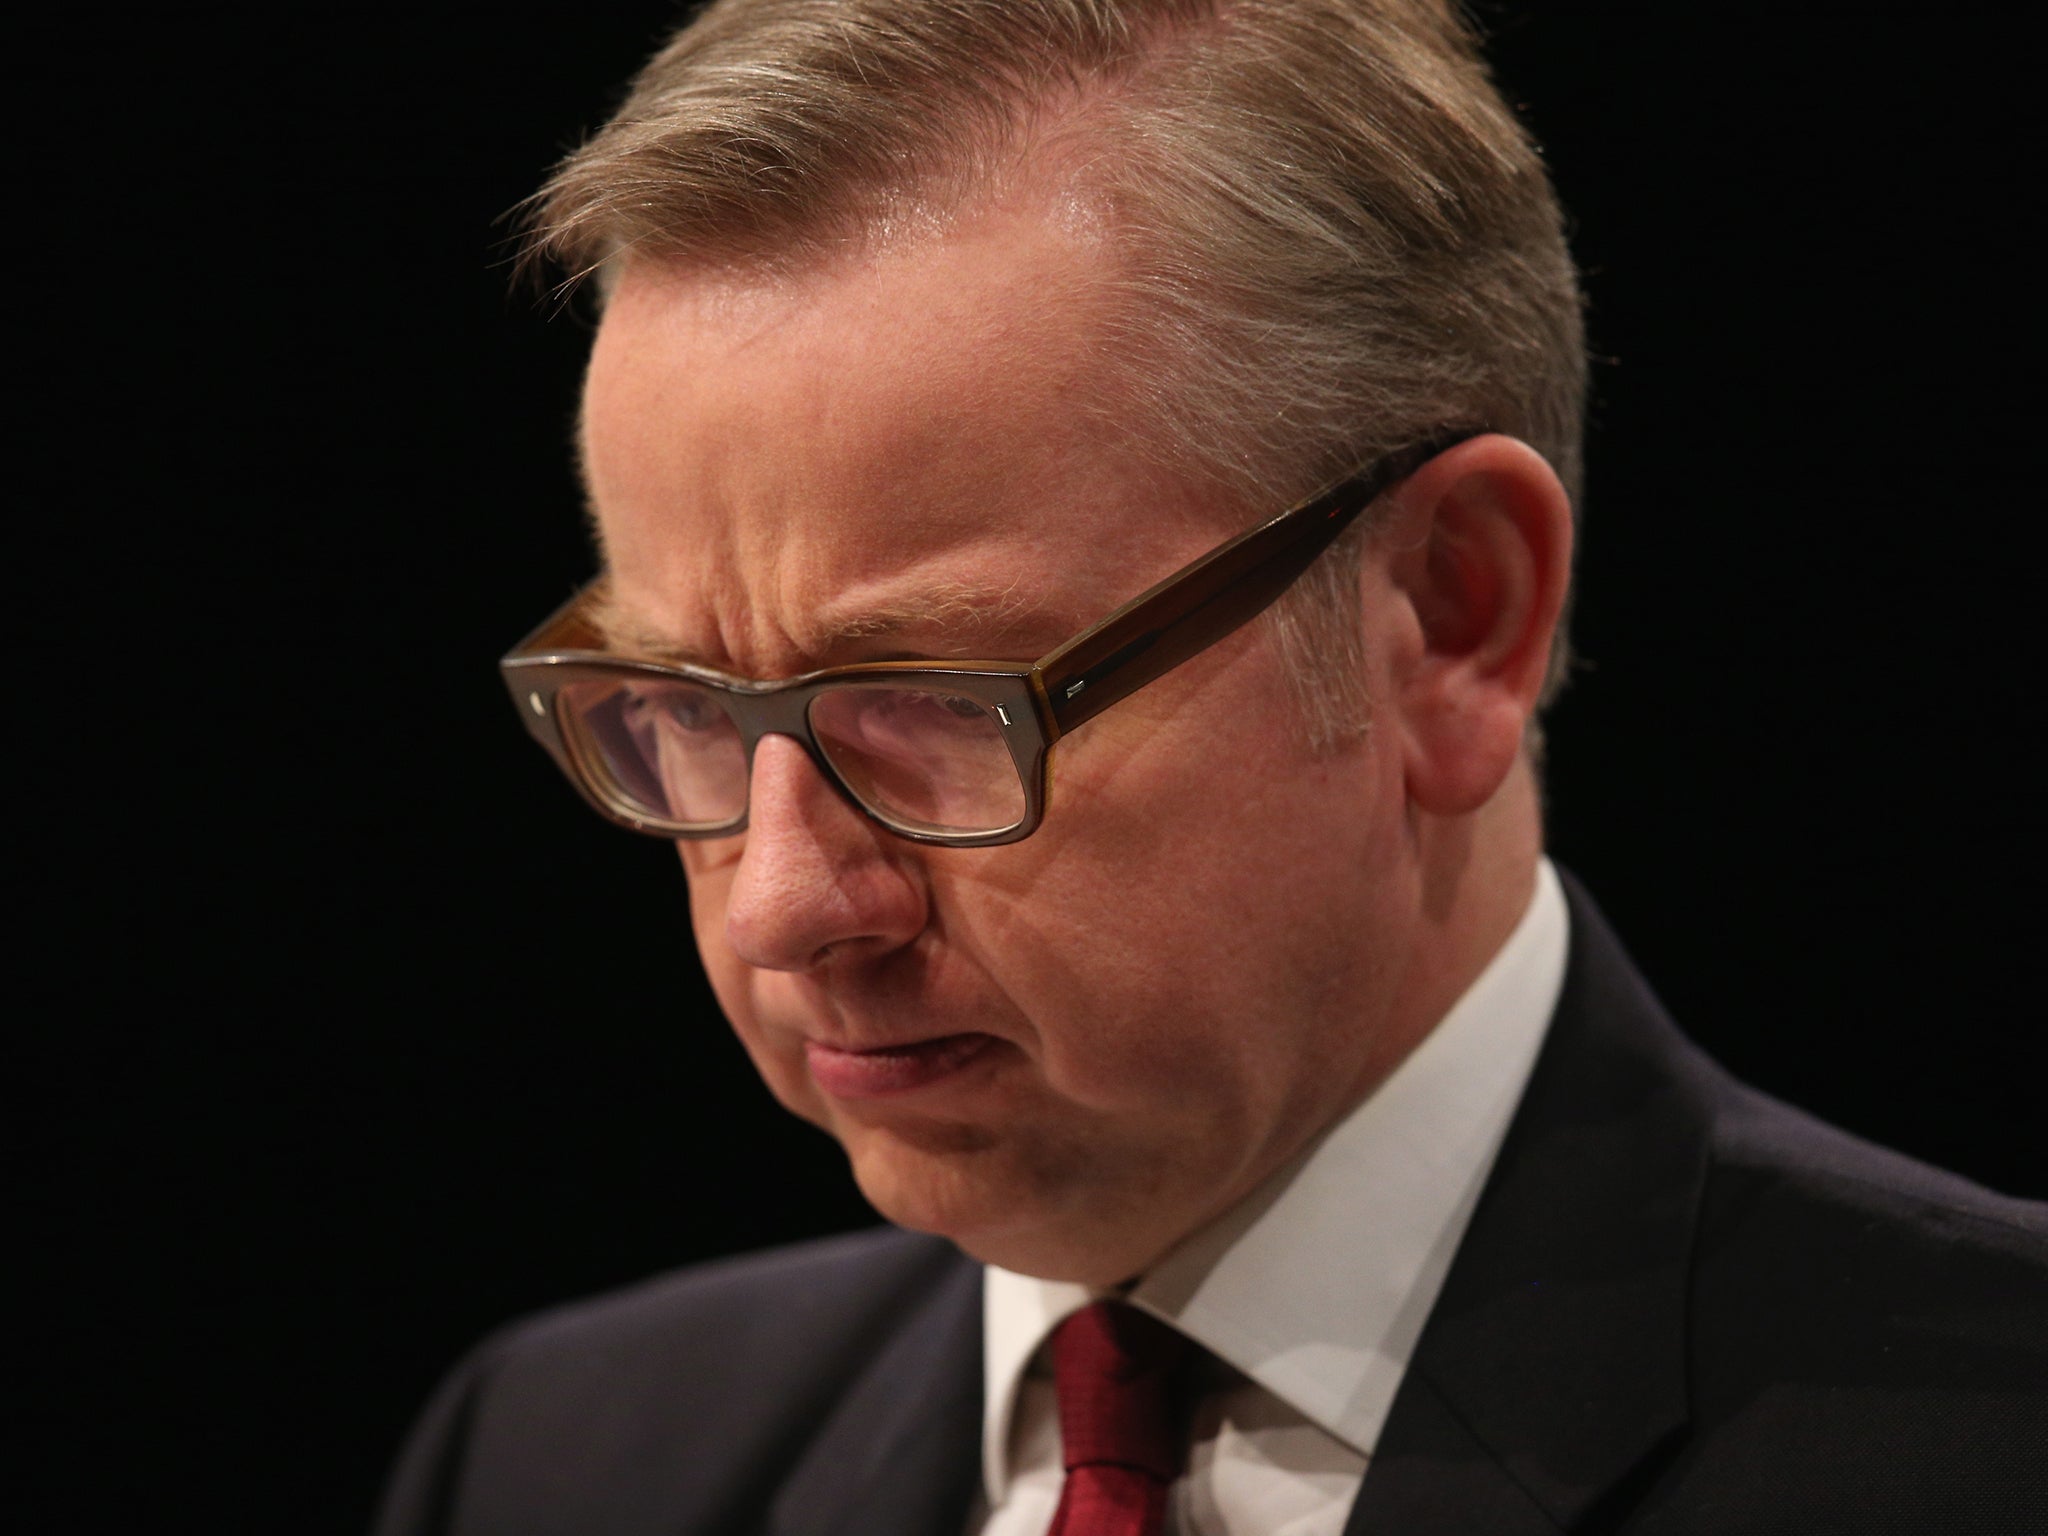 Michael Gove has committed himself to streamlining the justice system in England and Wales